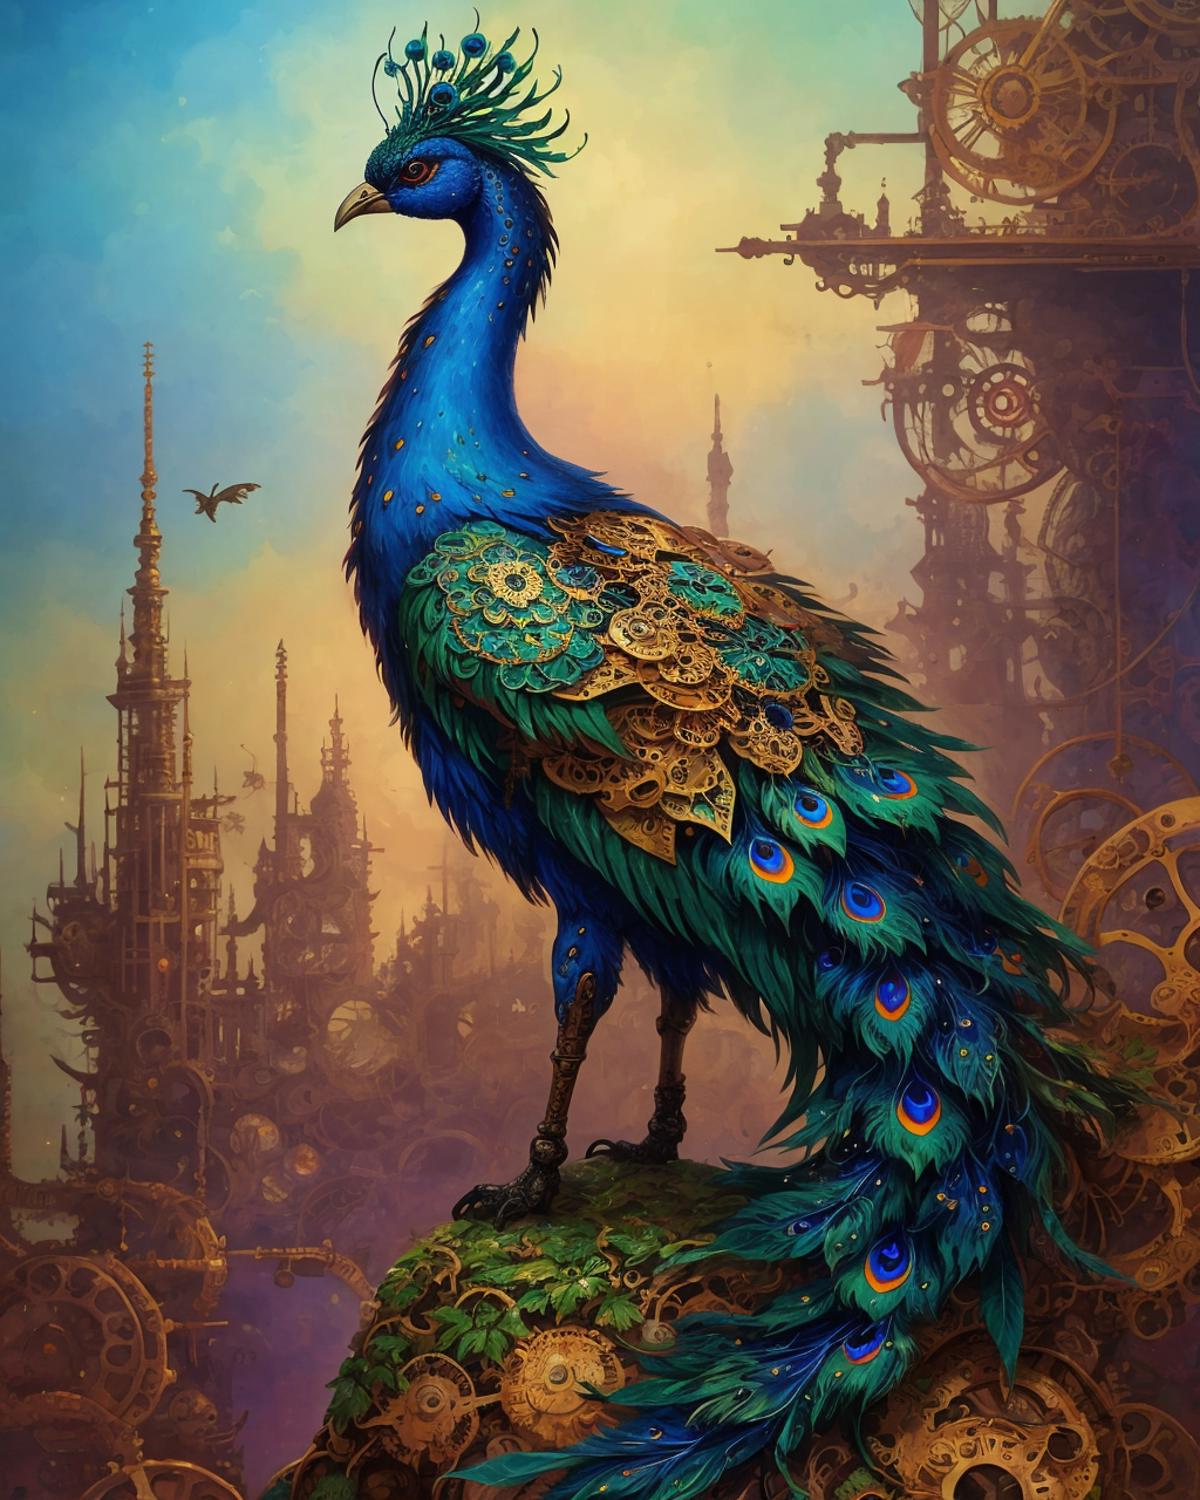 A beautifully illustrated blue peacock standing on a rock with gears in the background.